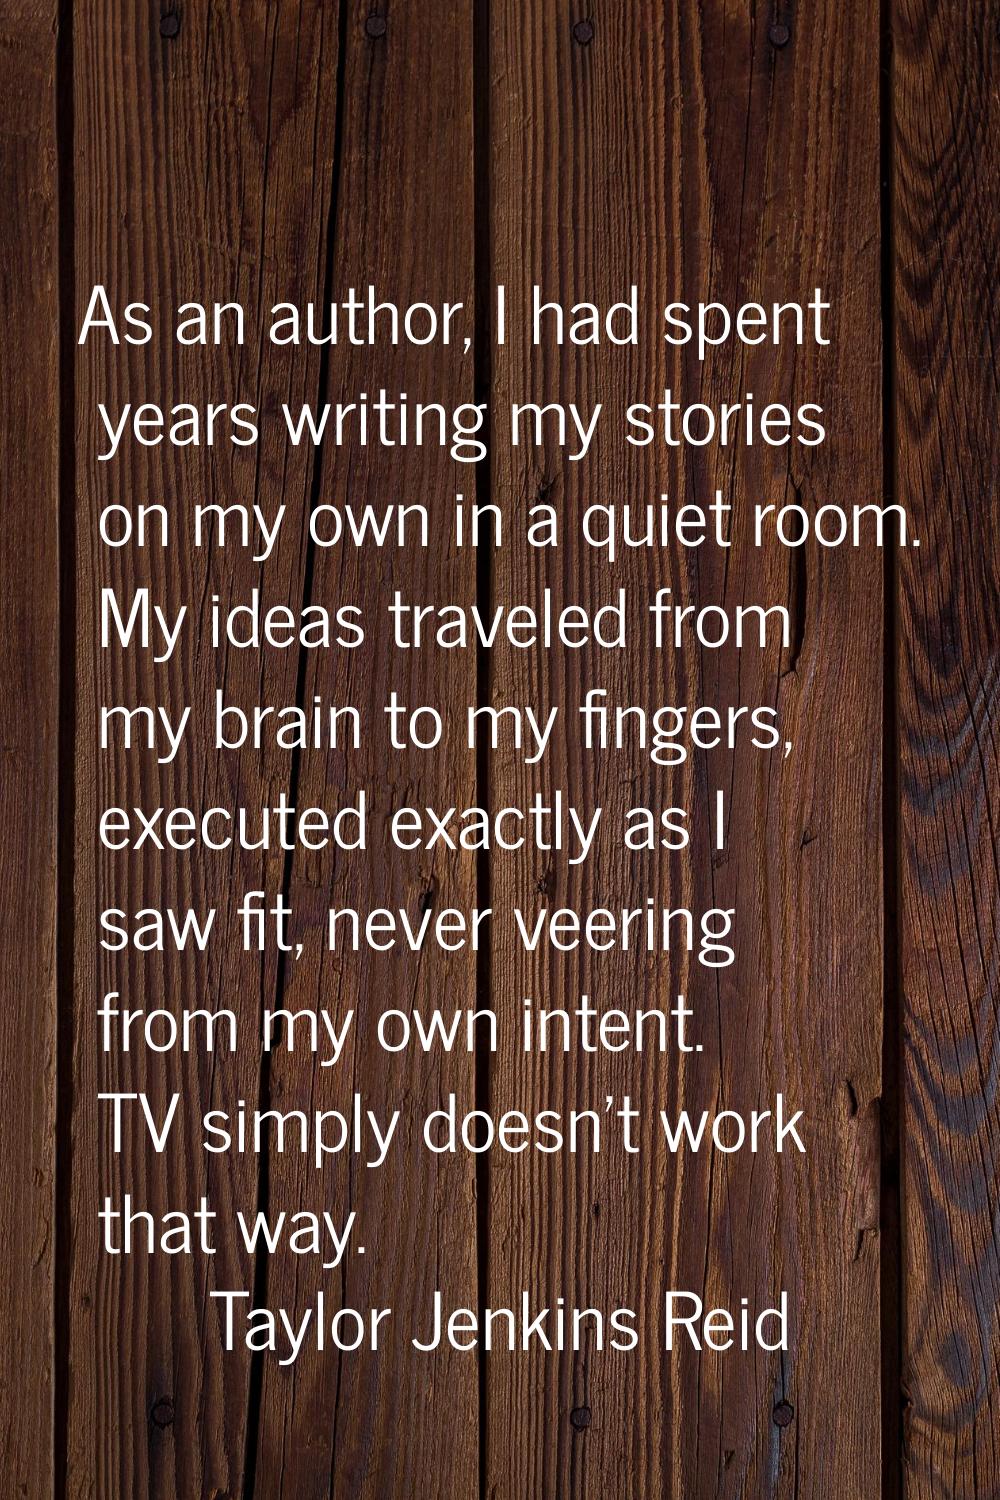 As an author, I had spent years writing my stories on my own in a quiet room. My ideas traveled fro